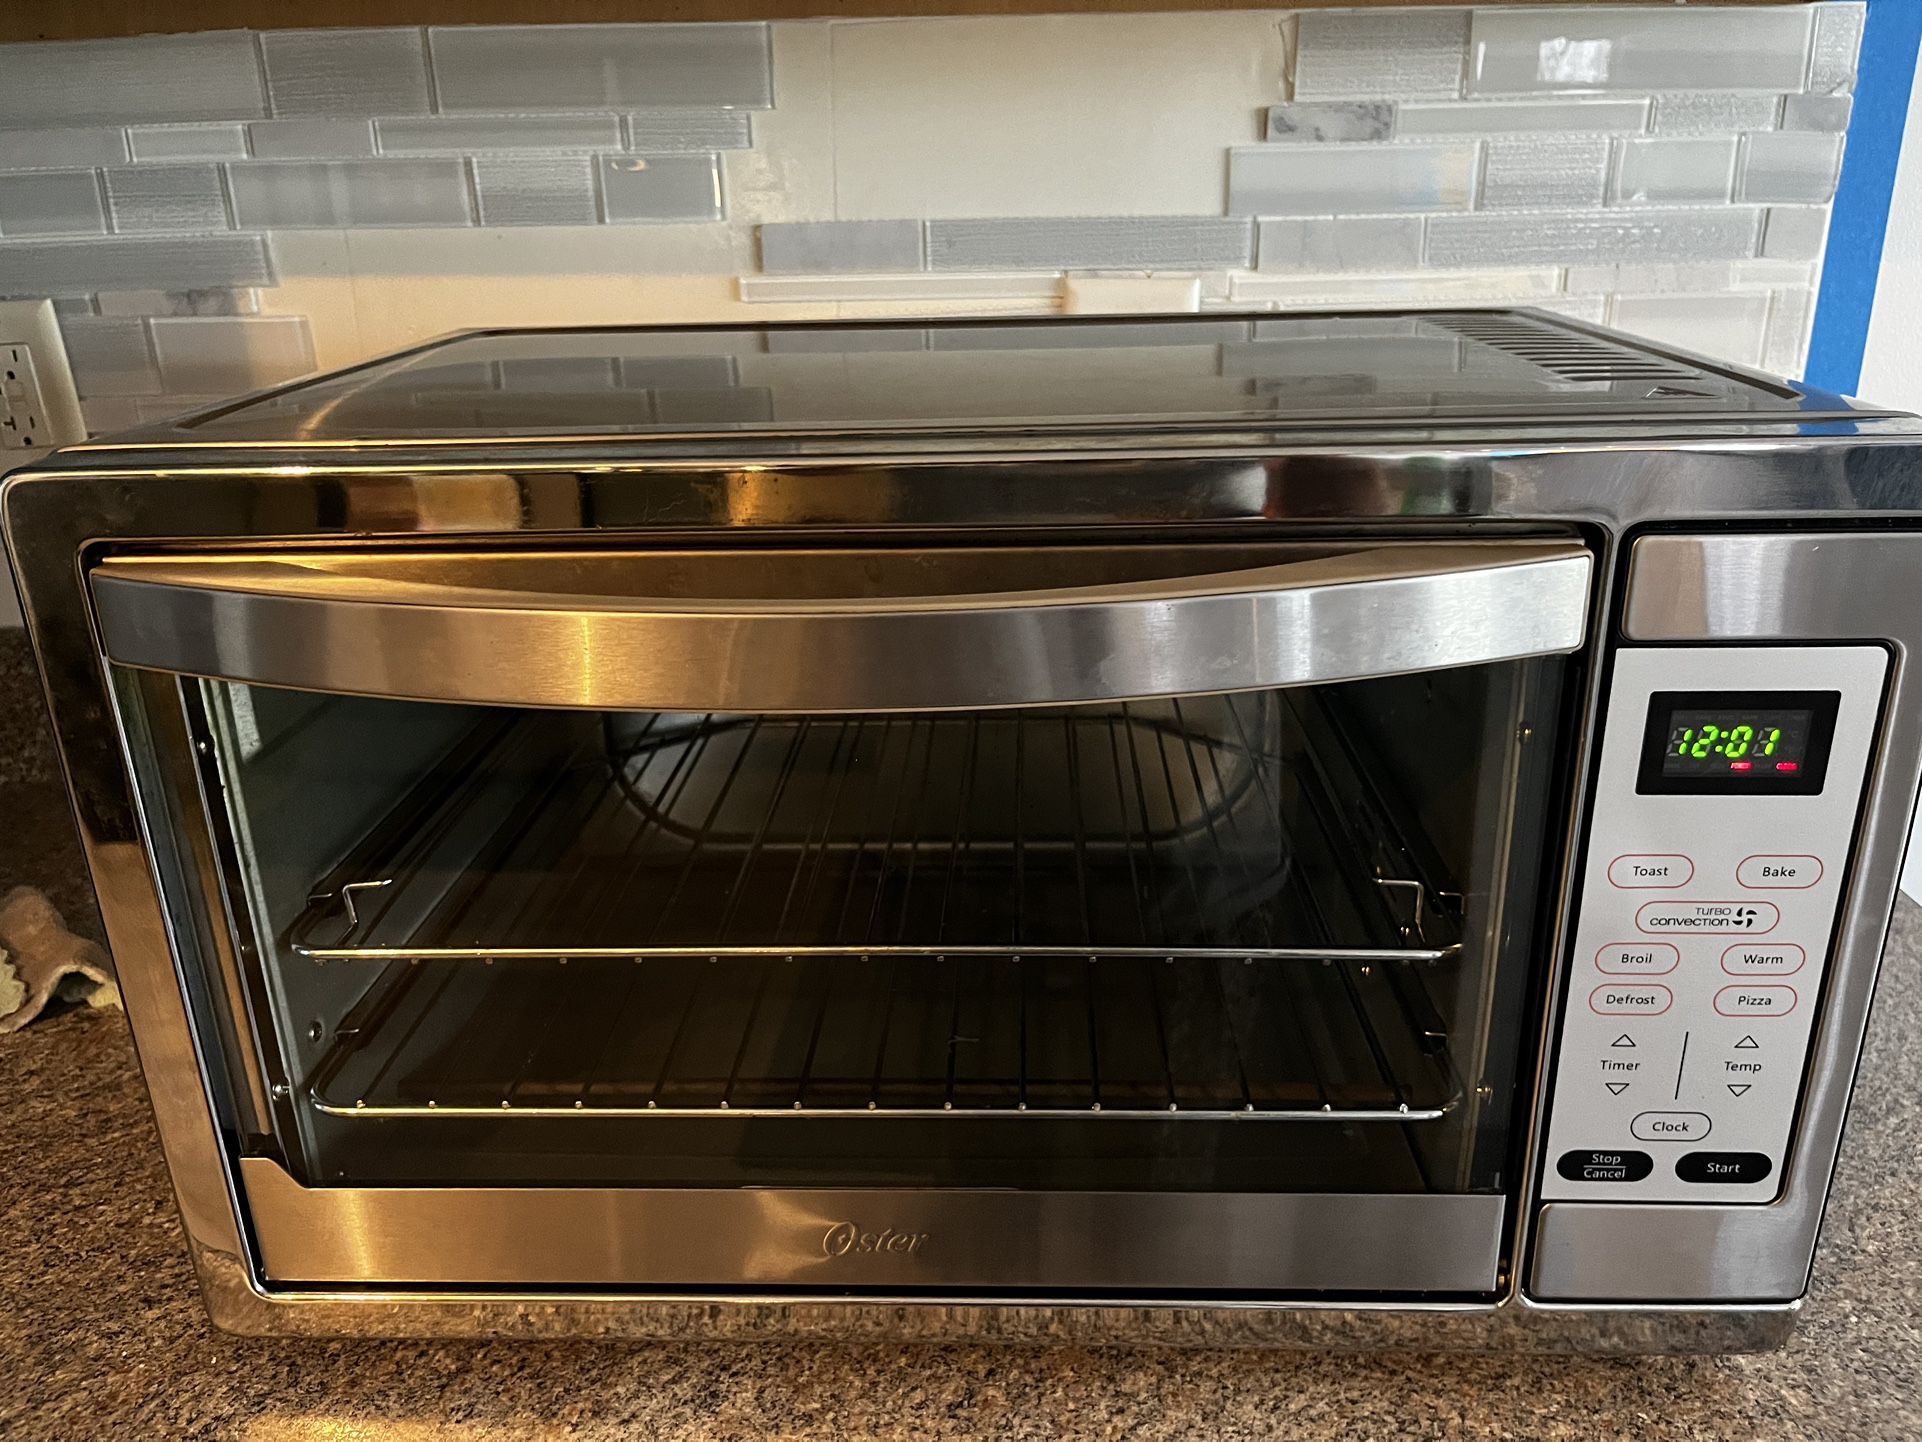 Countertop toaster oven - Oaster (OBO)